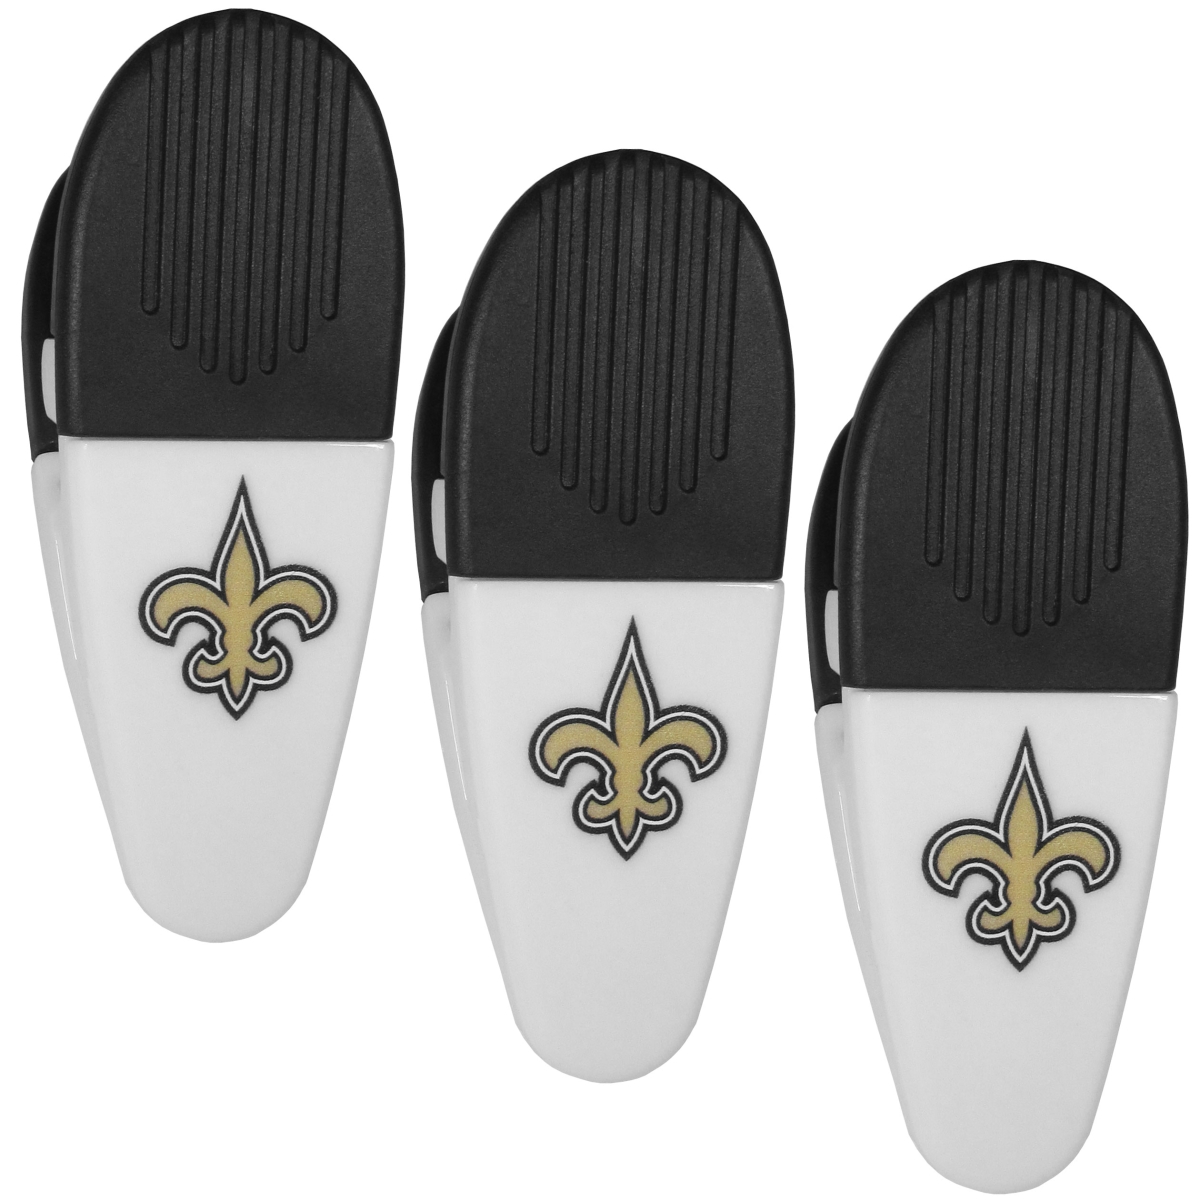 Picture of Siskiyou F3CM150 Unisex NFL New Orleans Saints Mini Chip Clip Magnets - Pack of 3